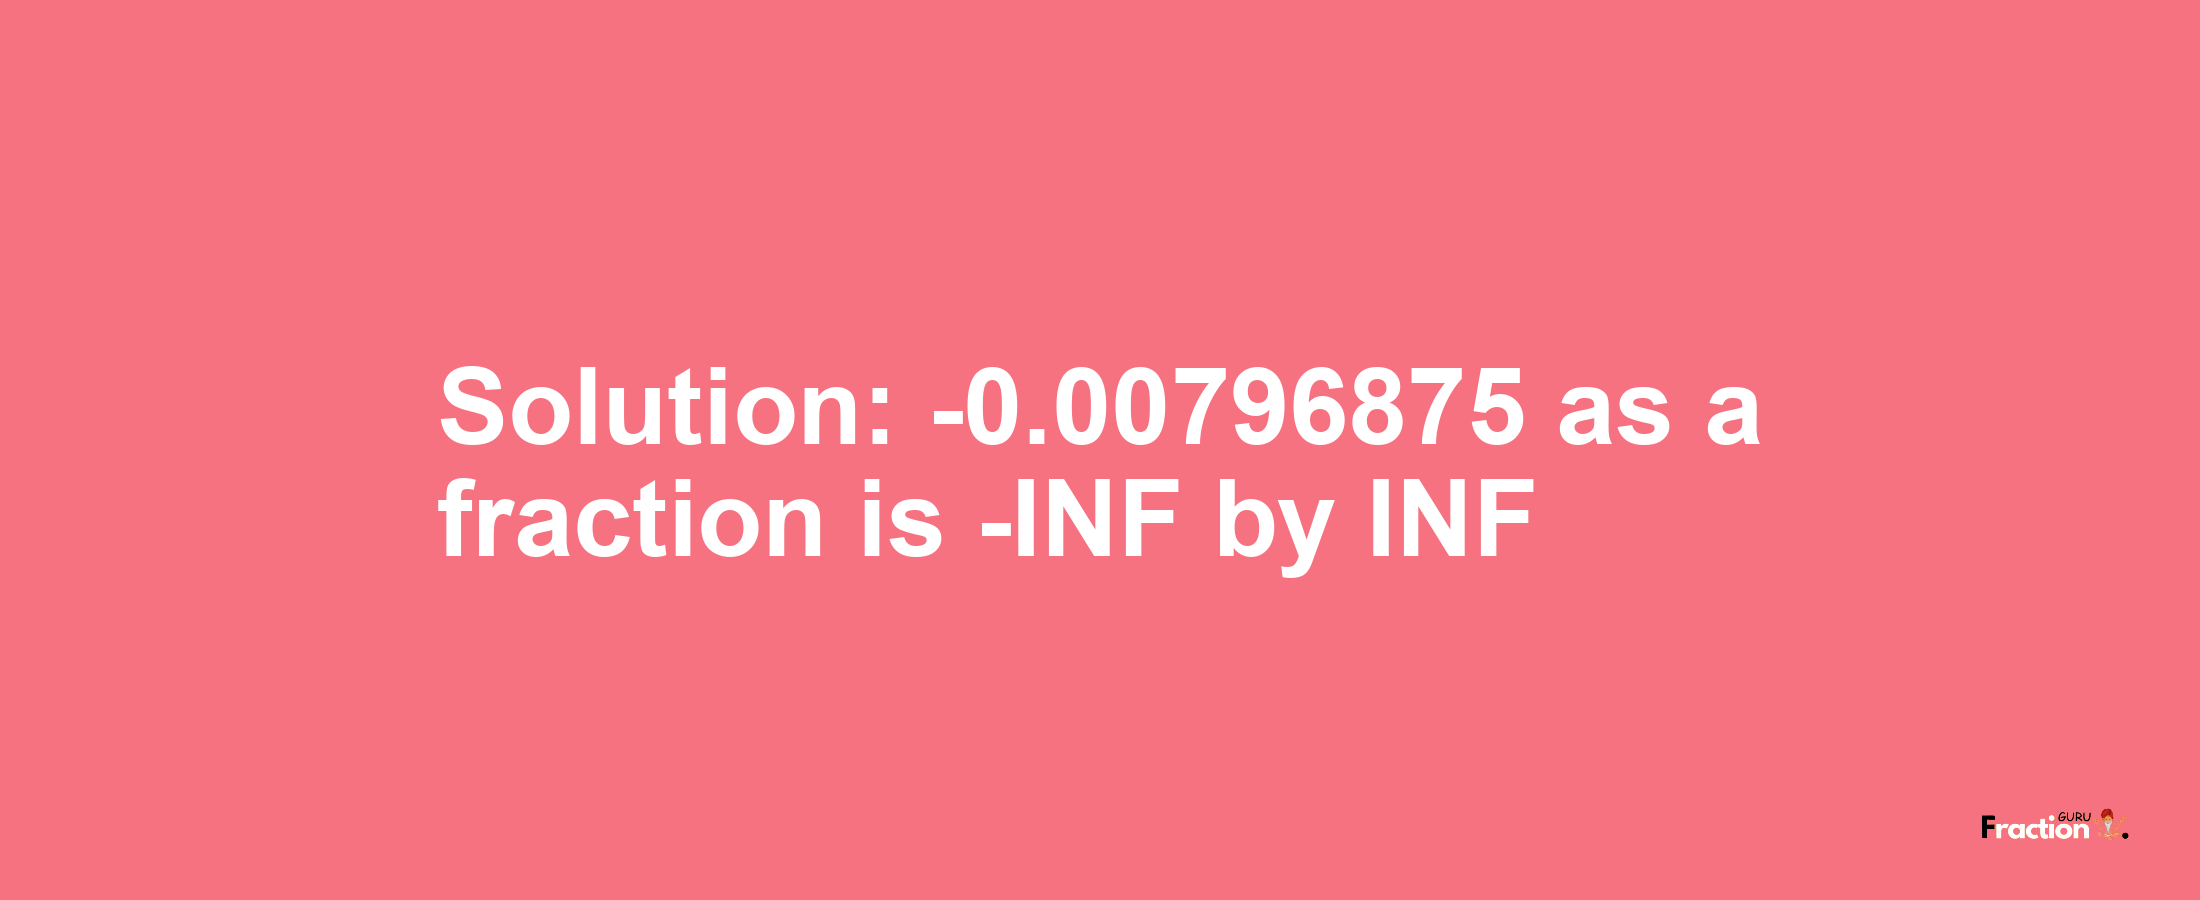 Solution:-0.00796875 as a fraction is -INF/INF